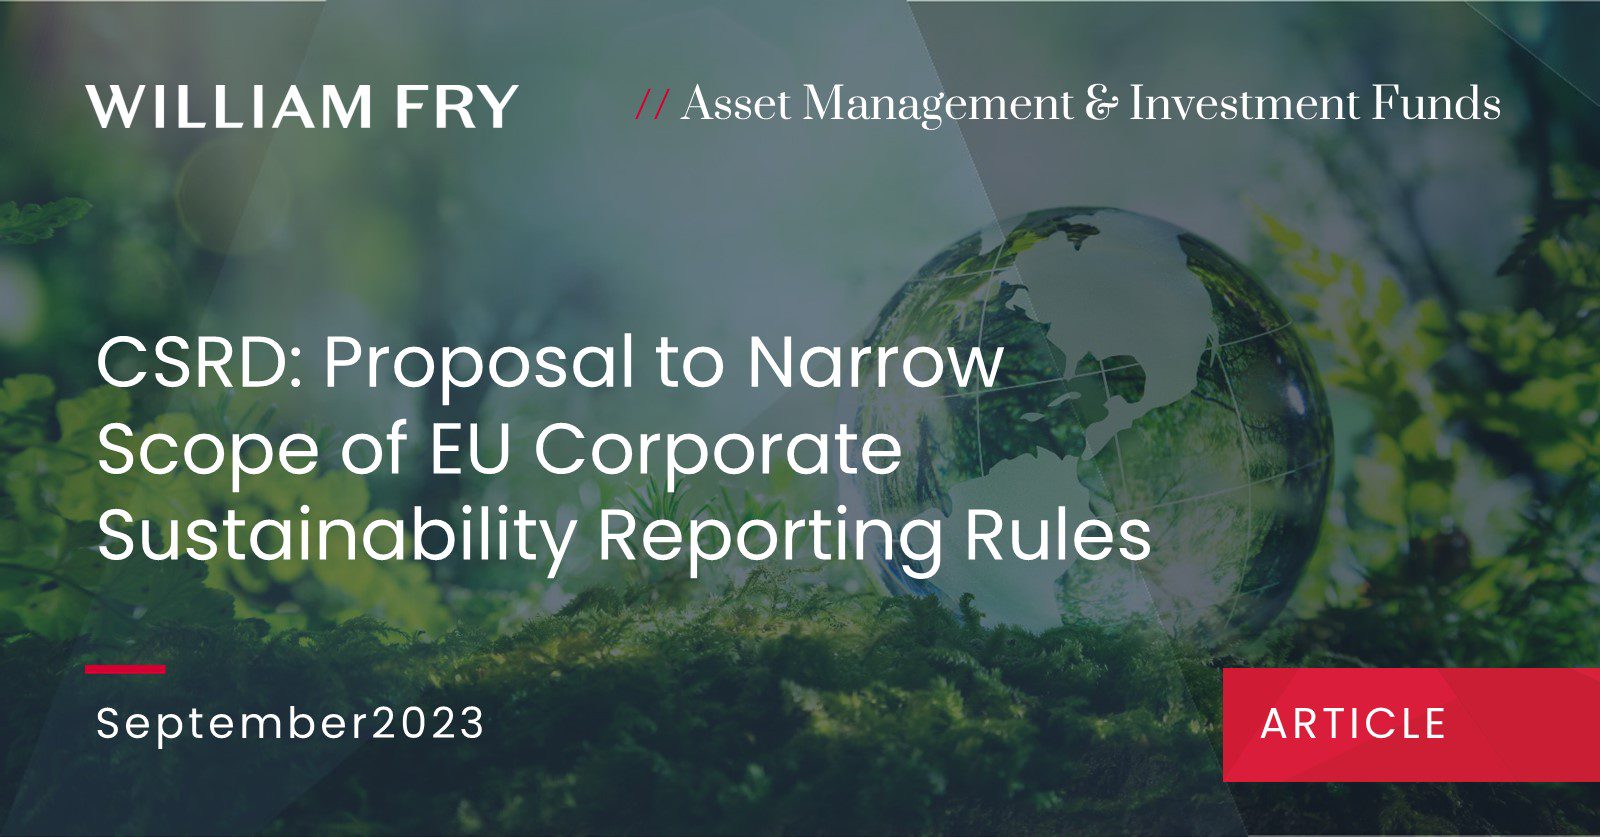 CSRD: Proposal to Narrow Scope of EU Corporate Sustainability Reporting Rules